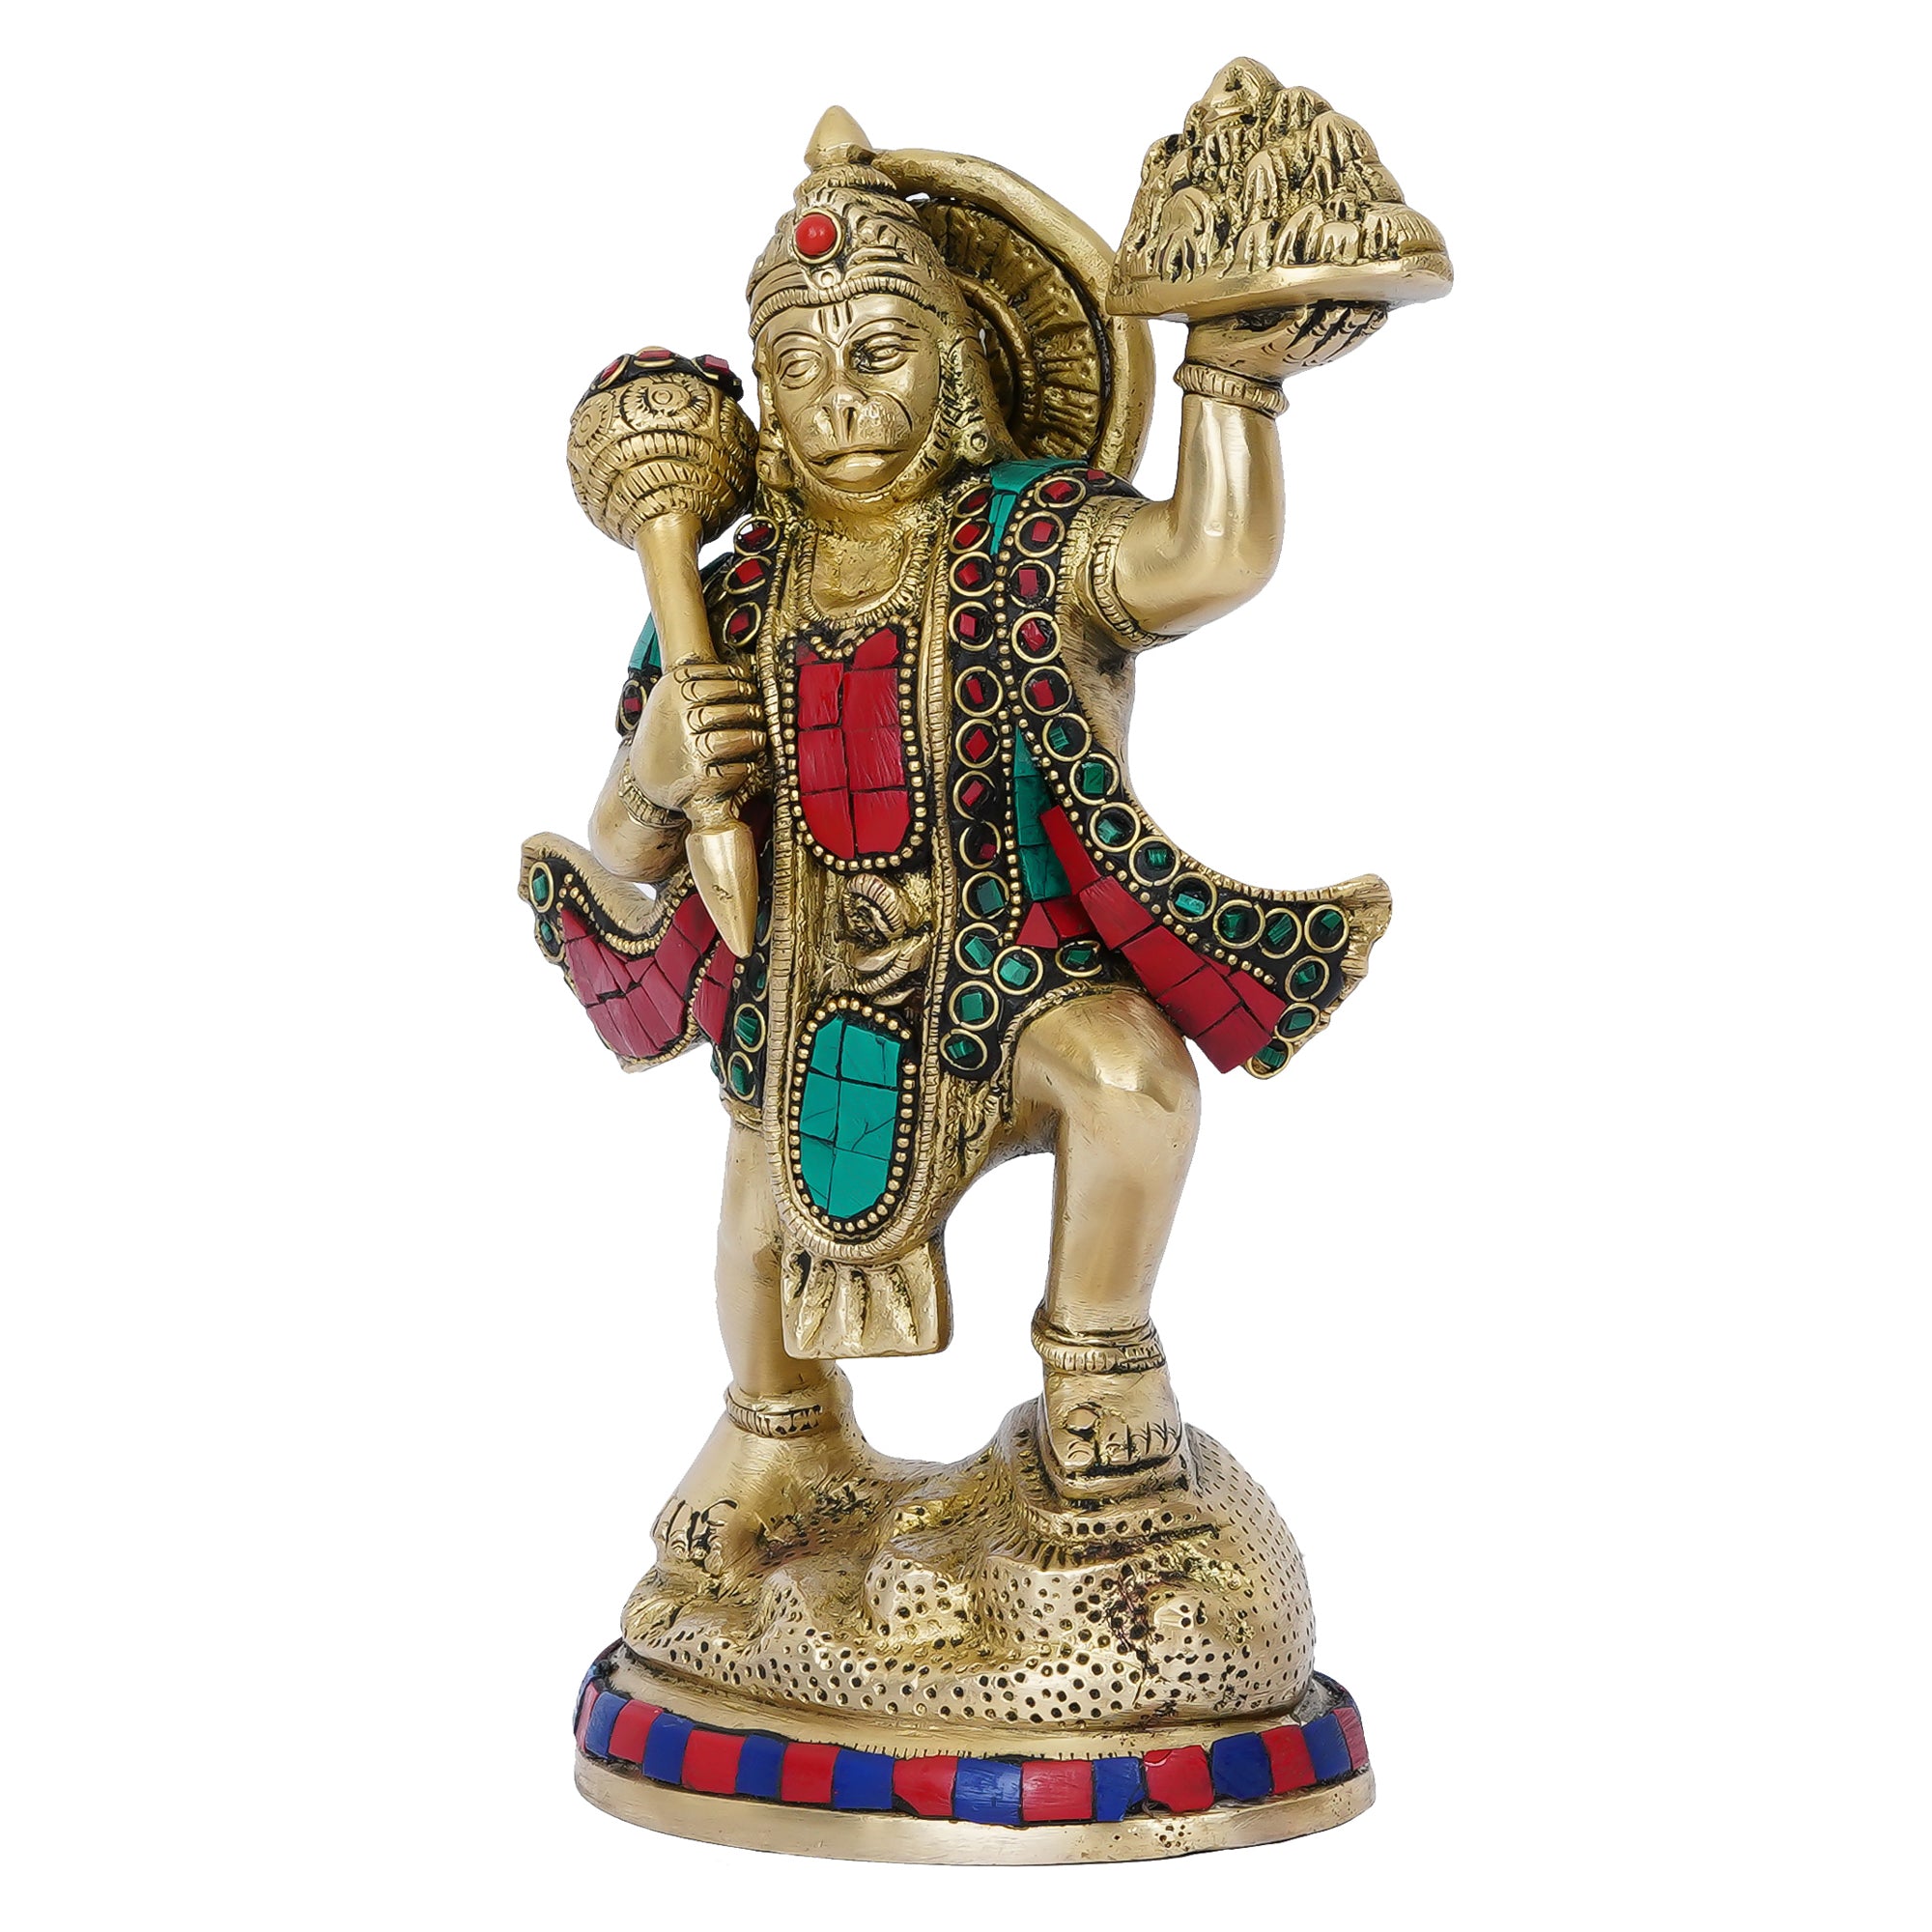 Colorful Stone Work Handcrafted Brass Lord Hanuman Statue Carrying Sanjeevani Mountain 4